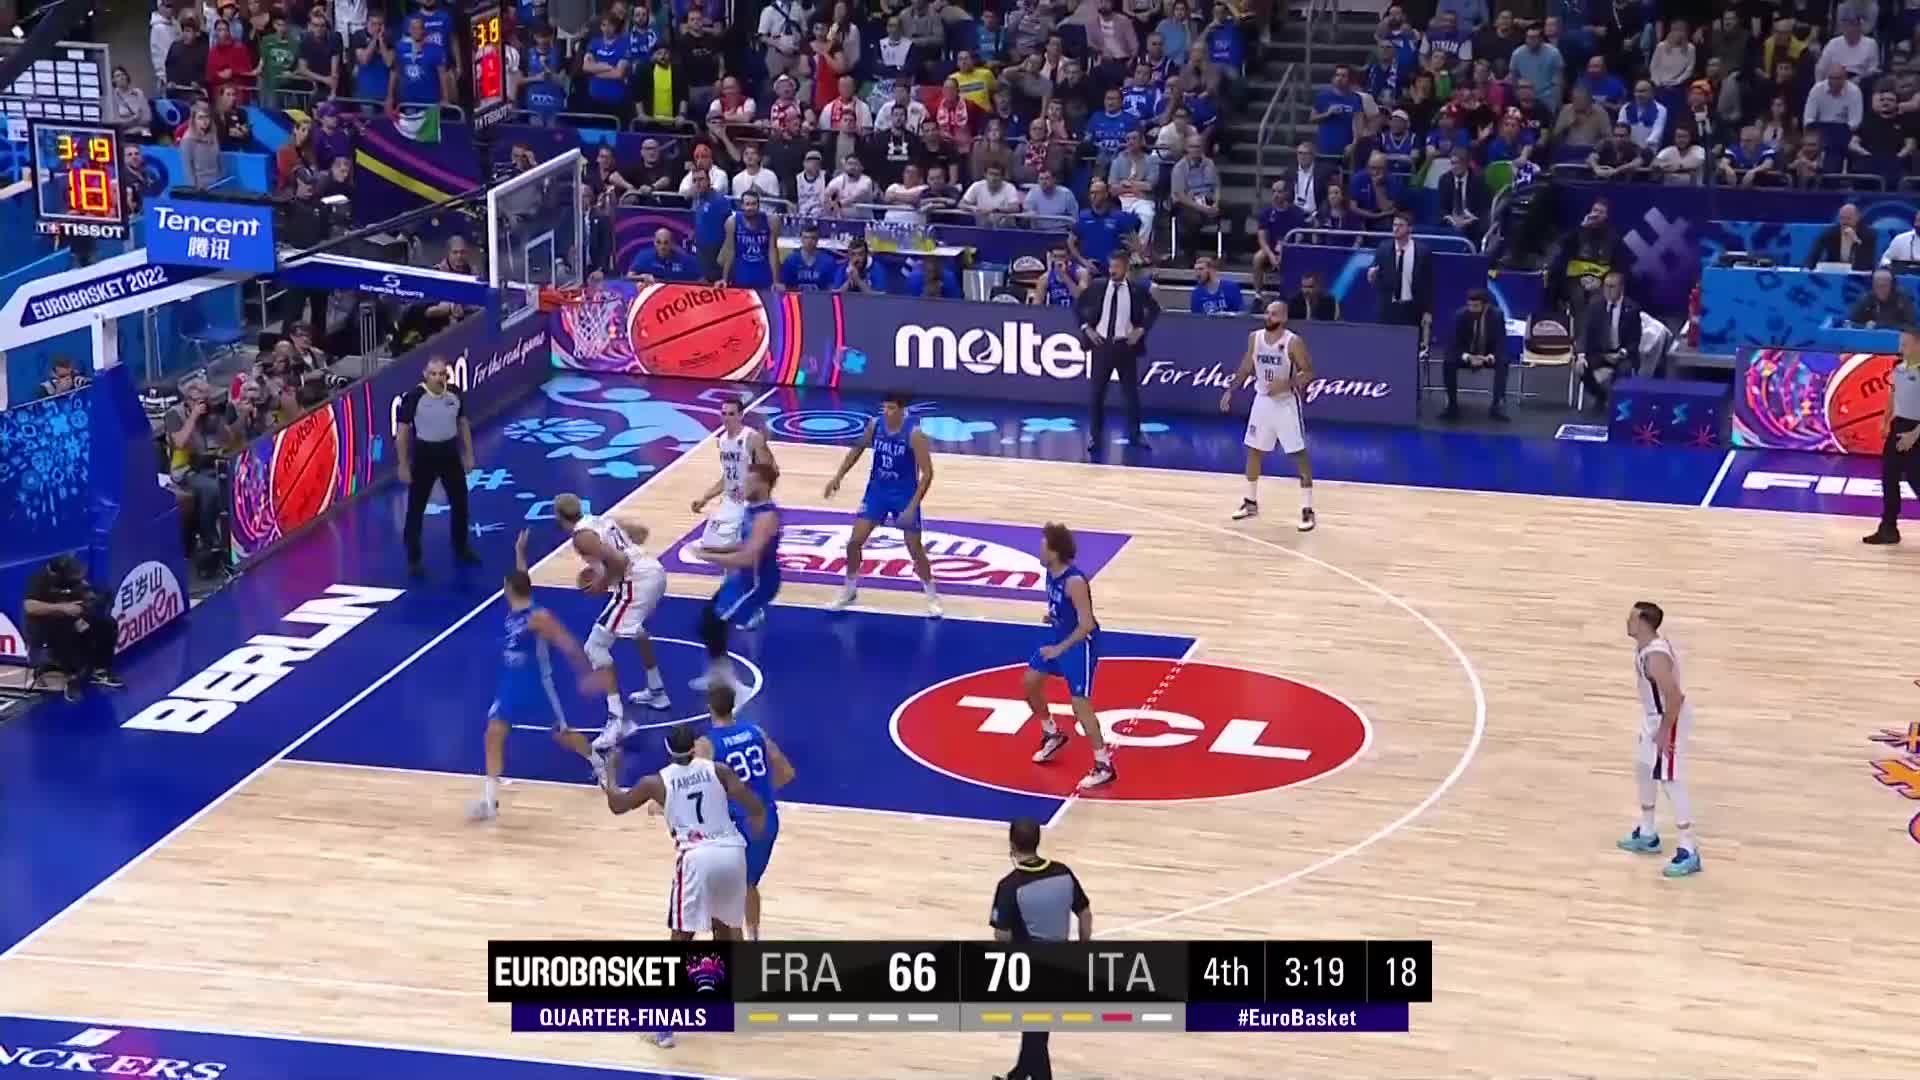 NBA Offseason Goberts Clutch Time Dominance Leads France to EuroBasket Semifinals